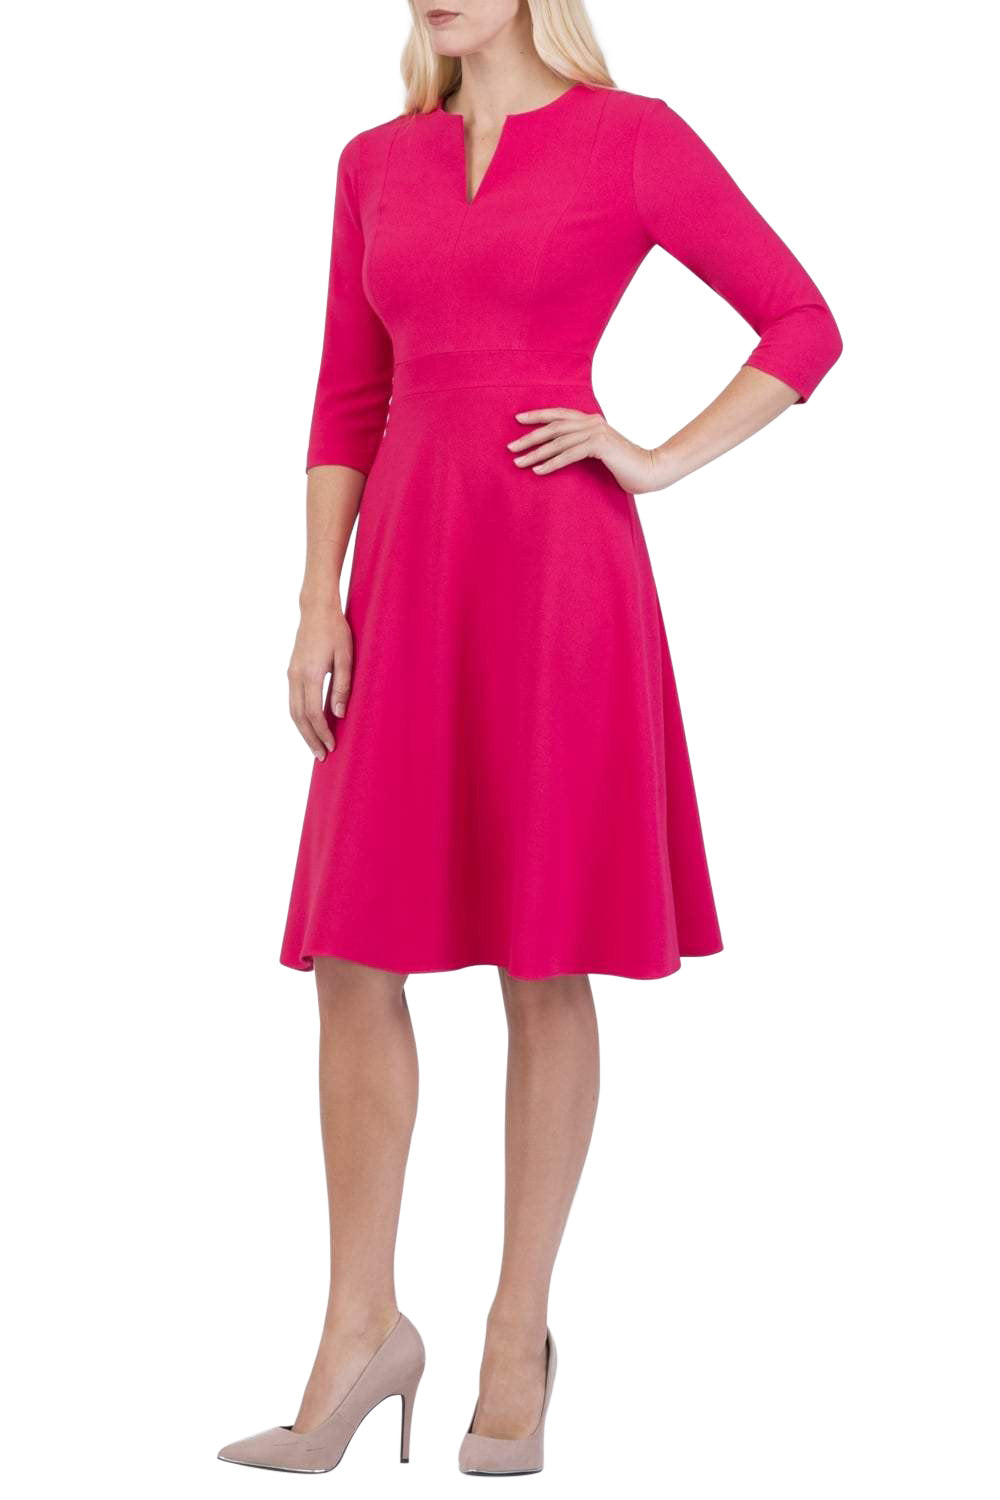 blonde model wearing diva catwalk romney three quarter sleeve swing dress with a band in honeysuckle pink front